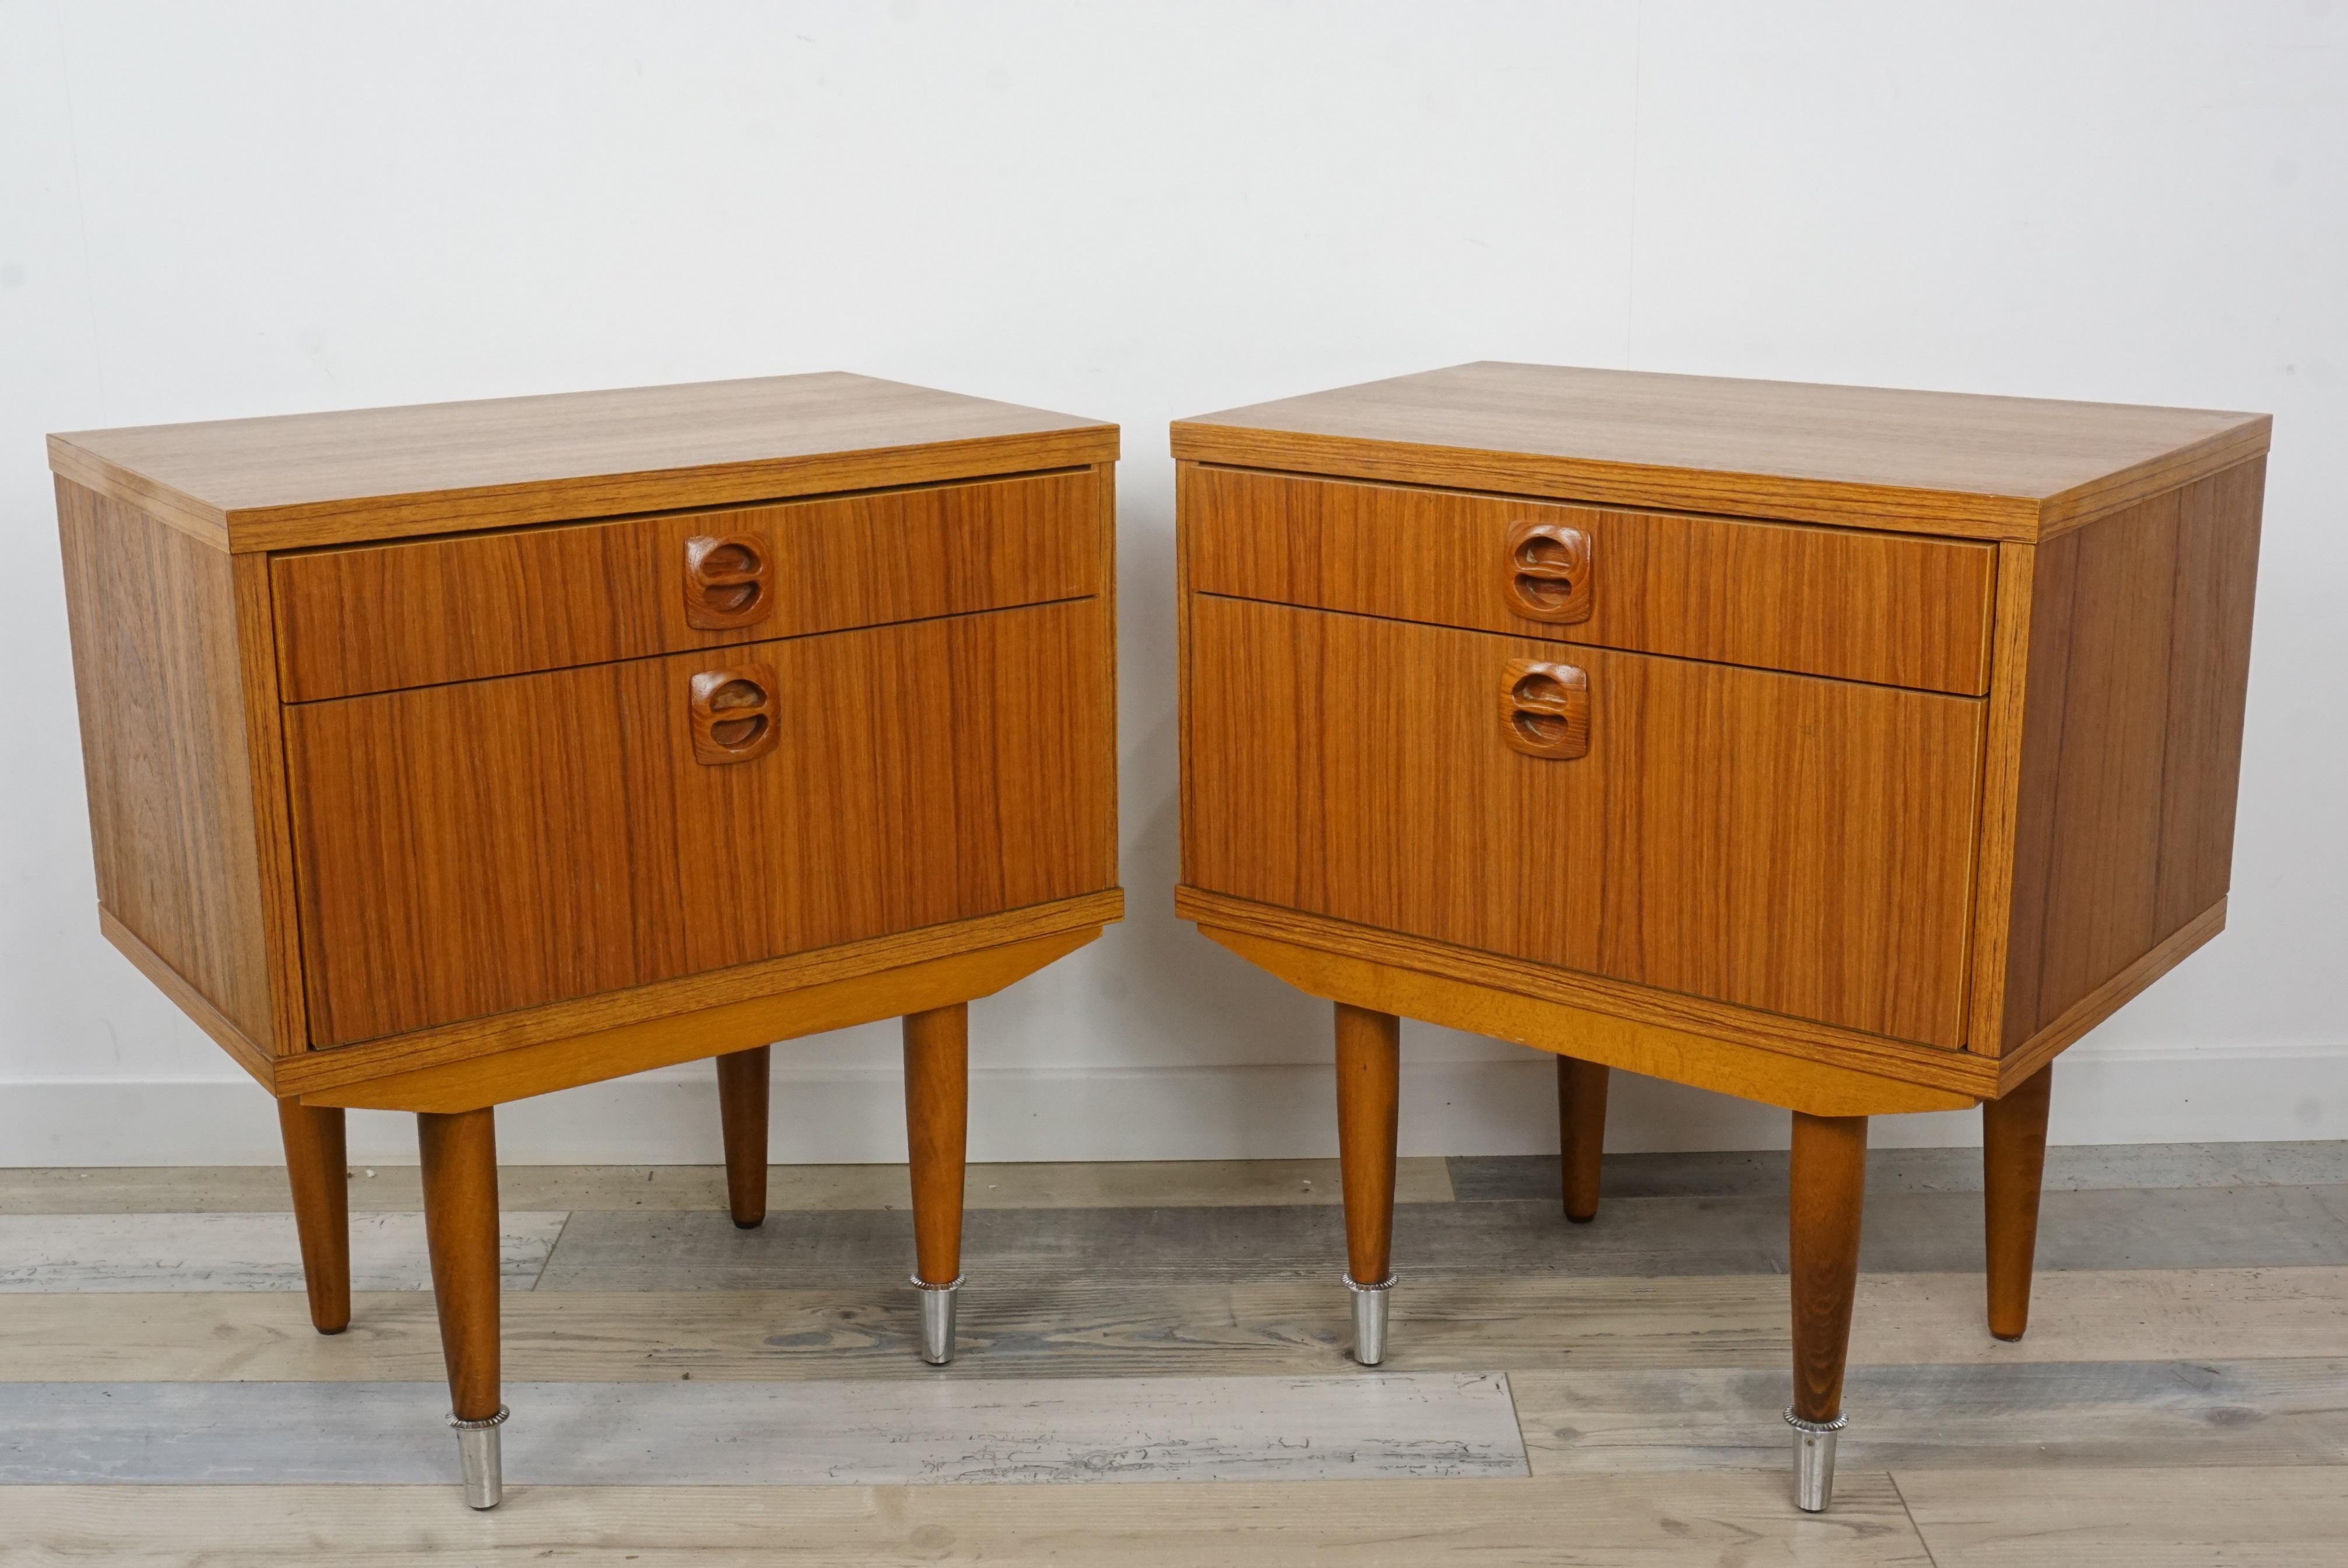 Pair of 1960s bedside tables, sculpted handles, compass feet chrome metal finish and 2 drawers with one bigger opening with flap. All in excellent condition.